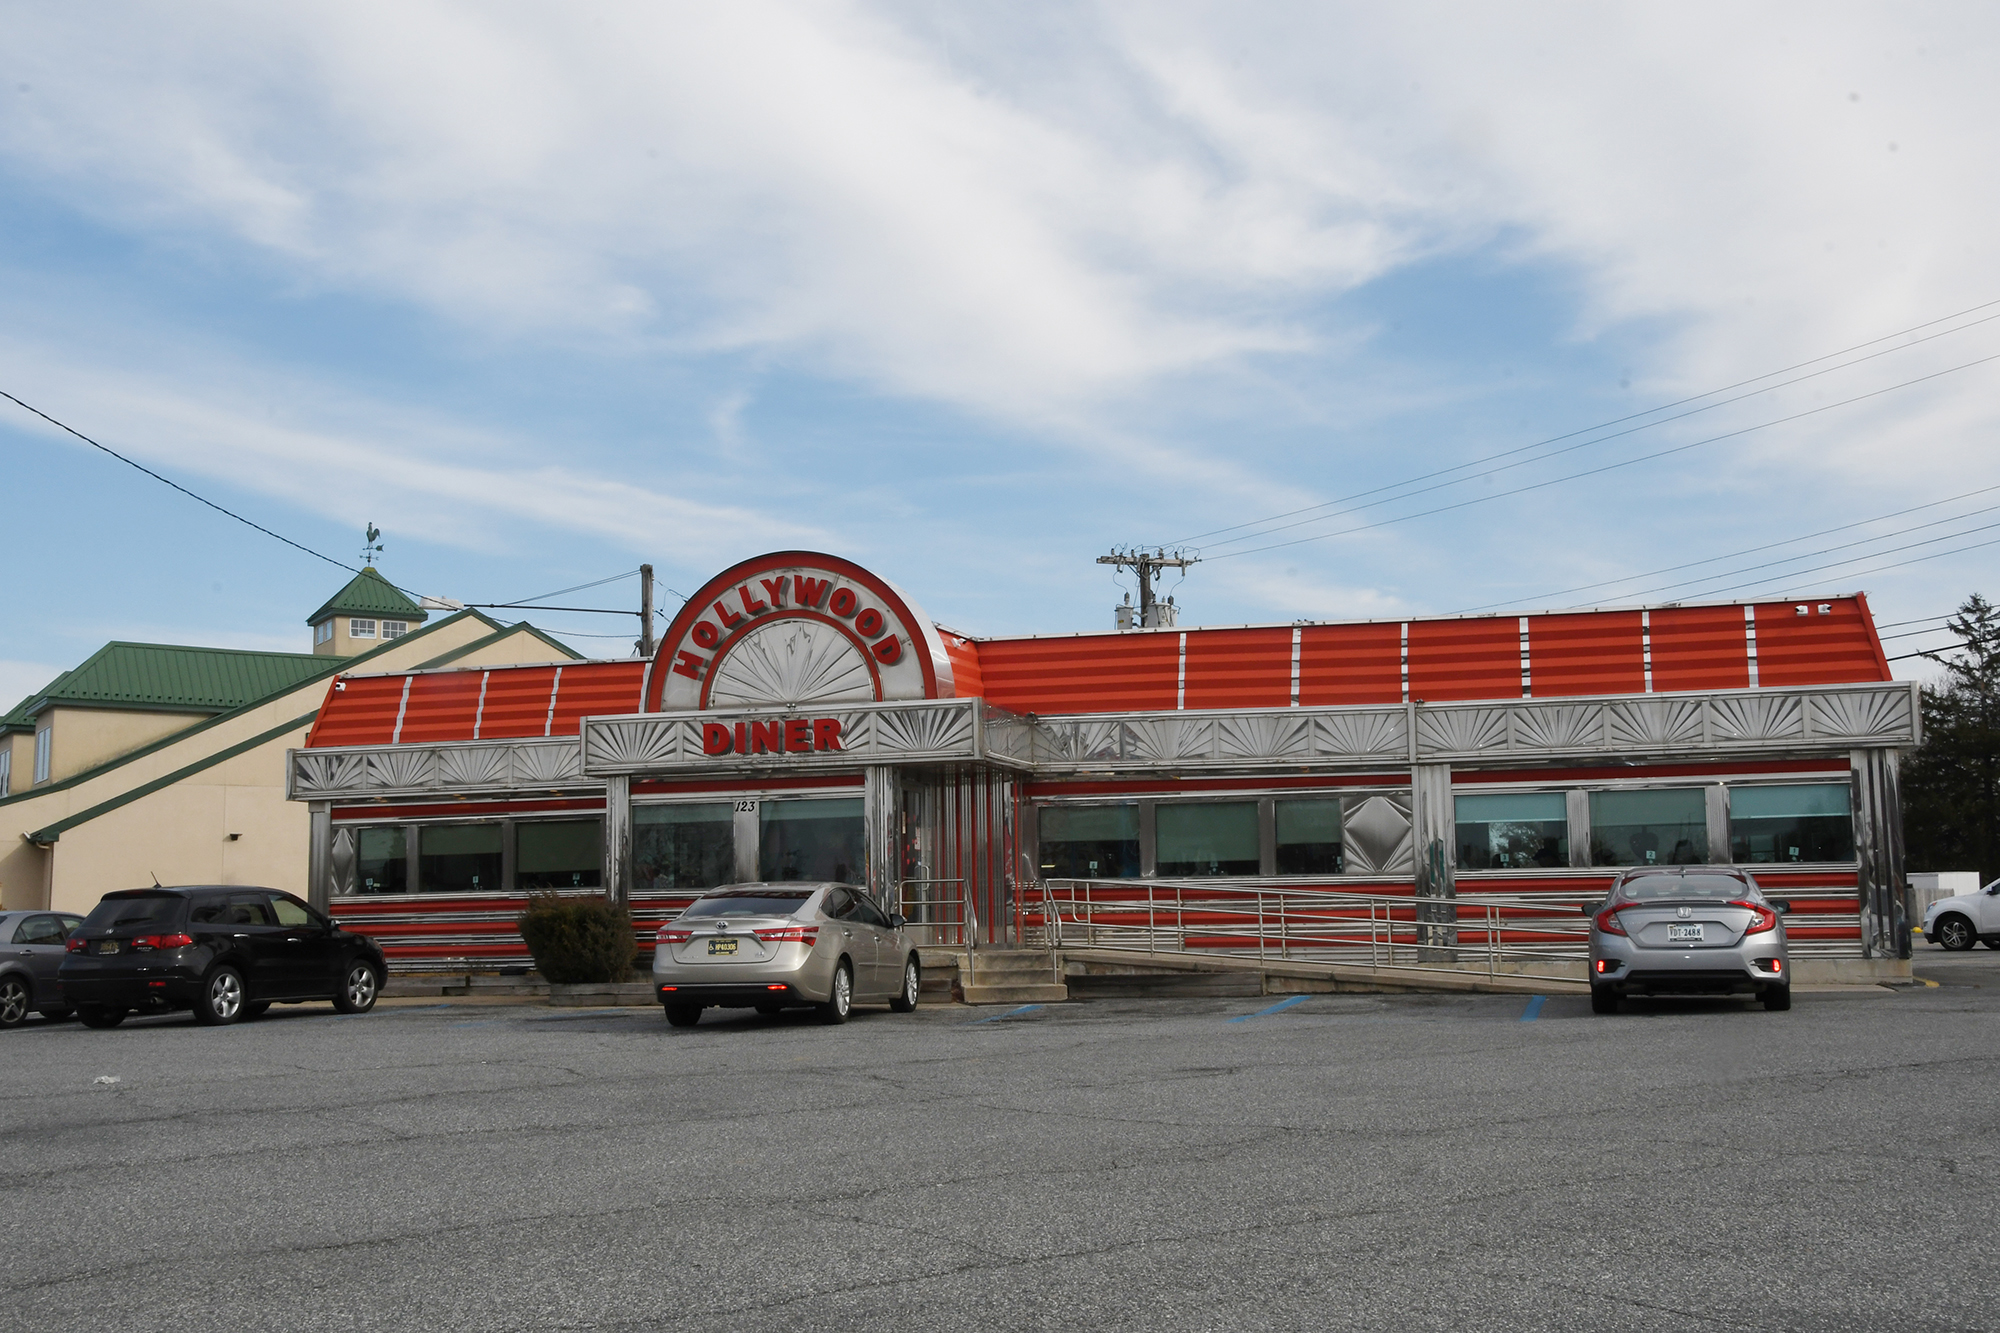 Dover's Hollywood Diner, shown in a recent photo, was the site of a 1962 sit-in by an interracial group of students from Delaware State University and the University of Delaware.